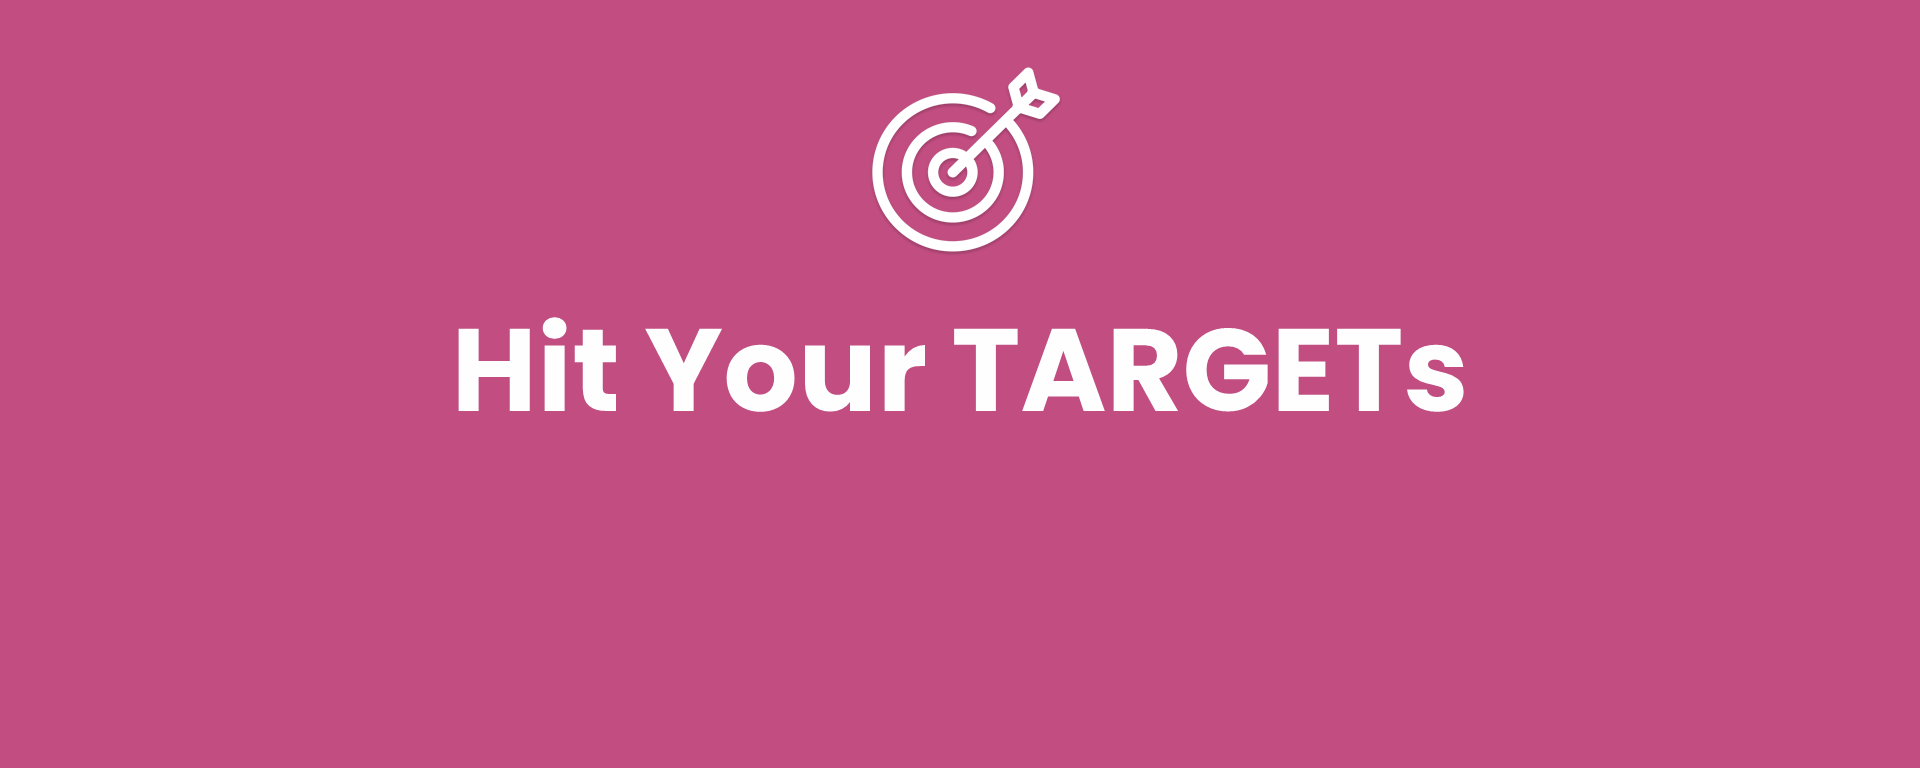 Hit Your TARGETs